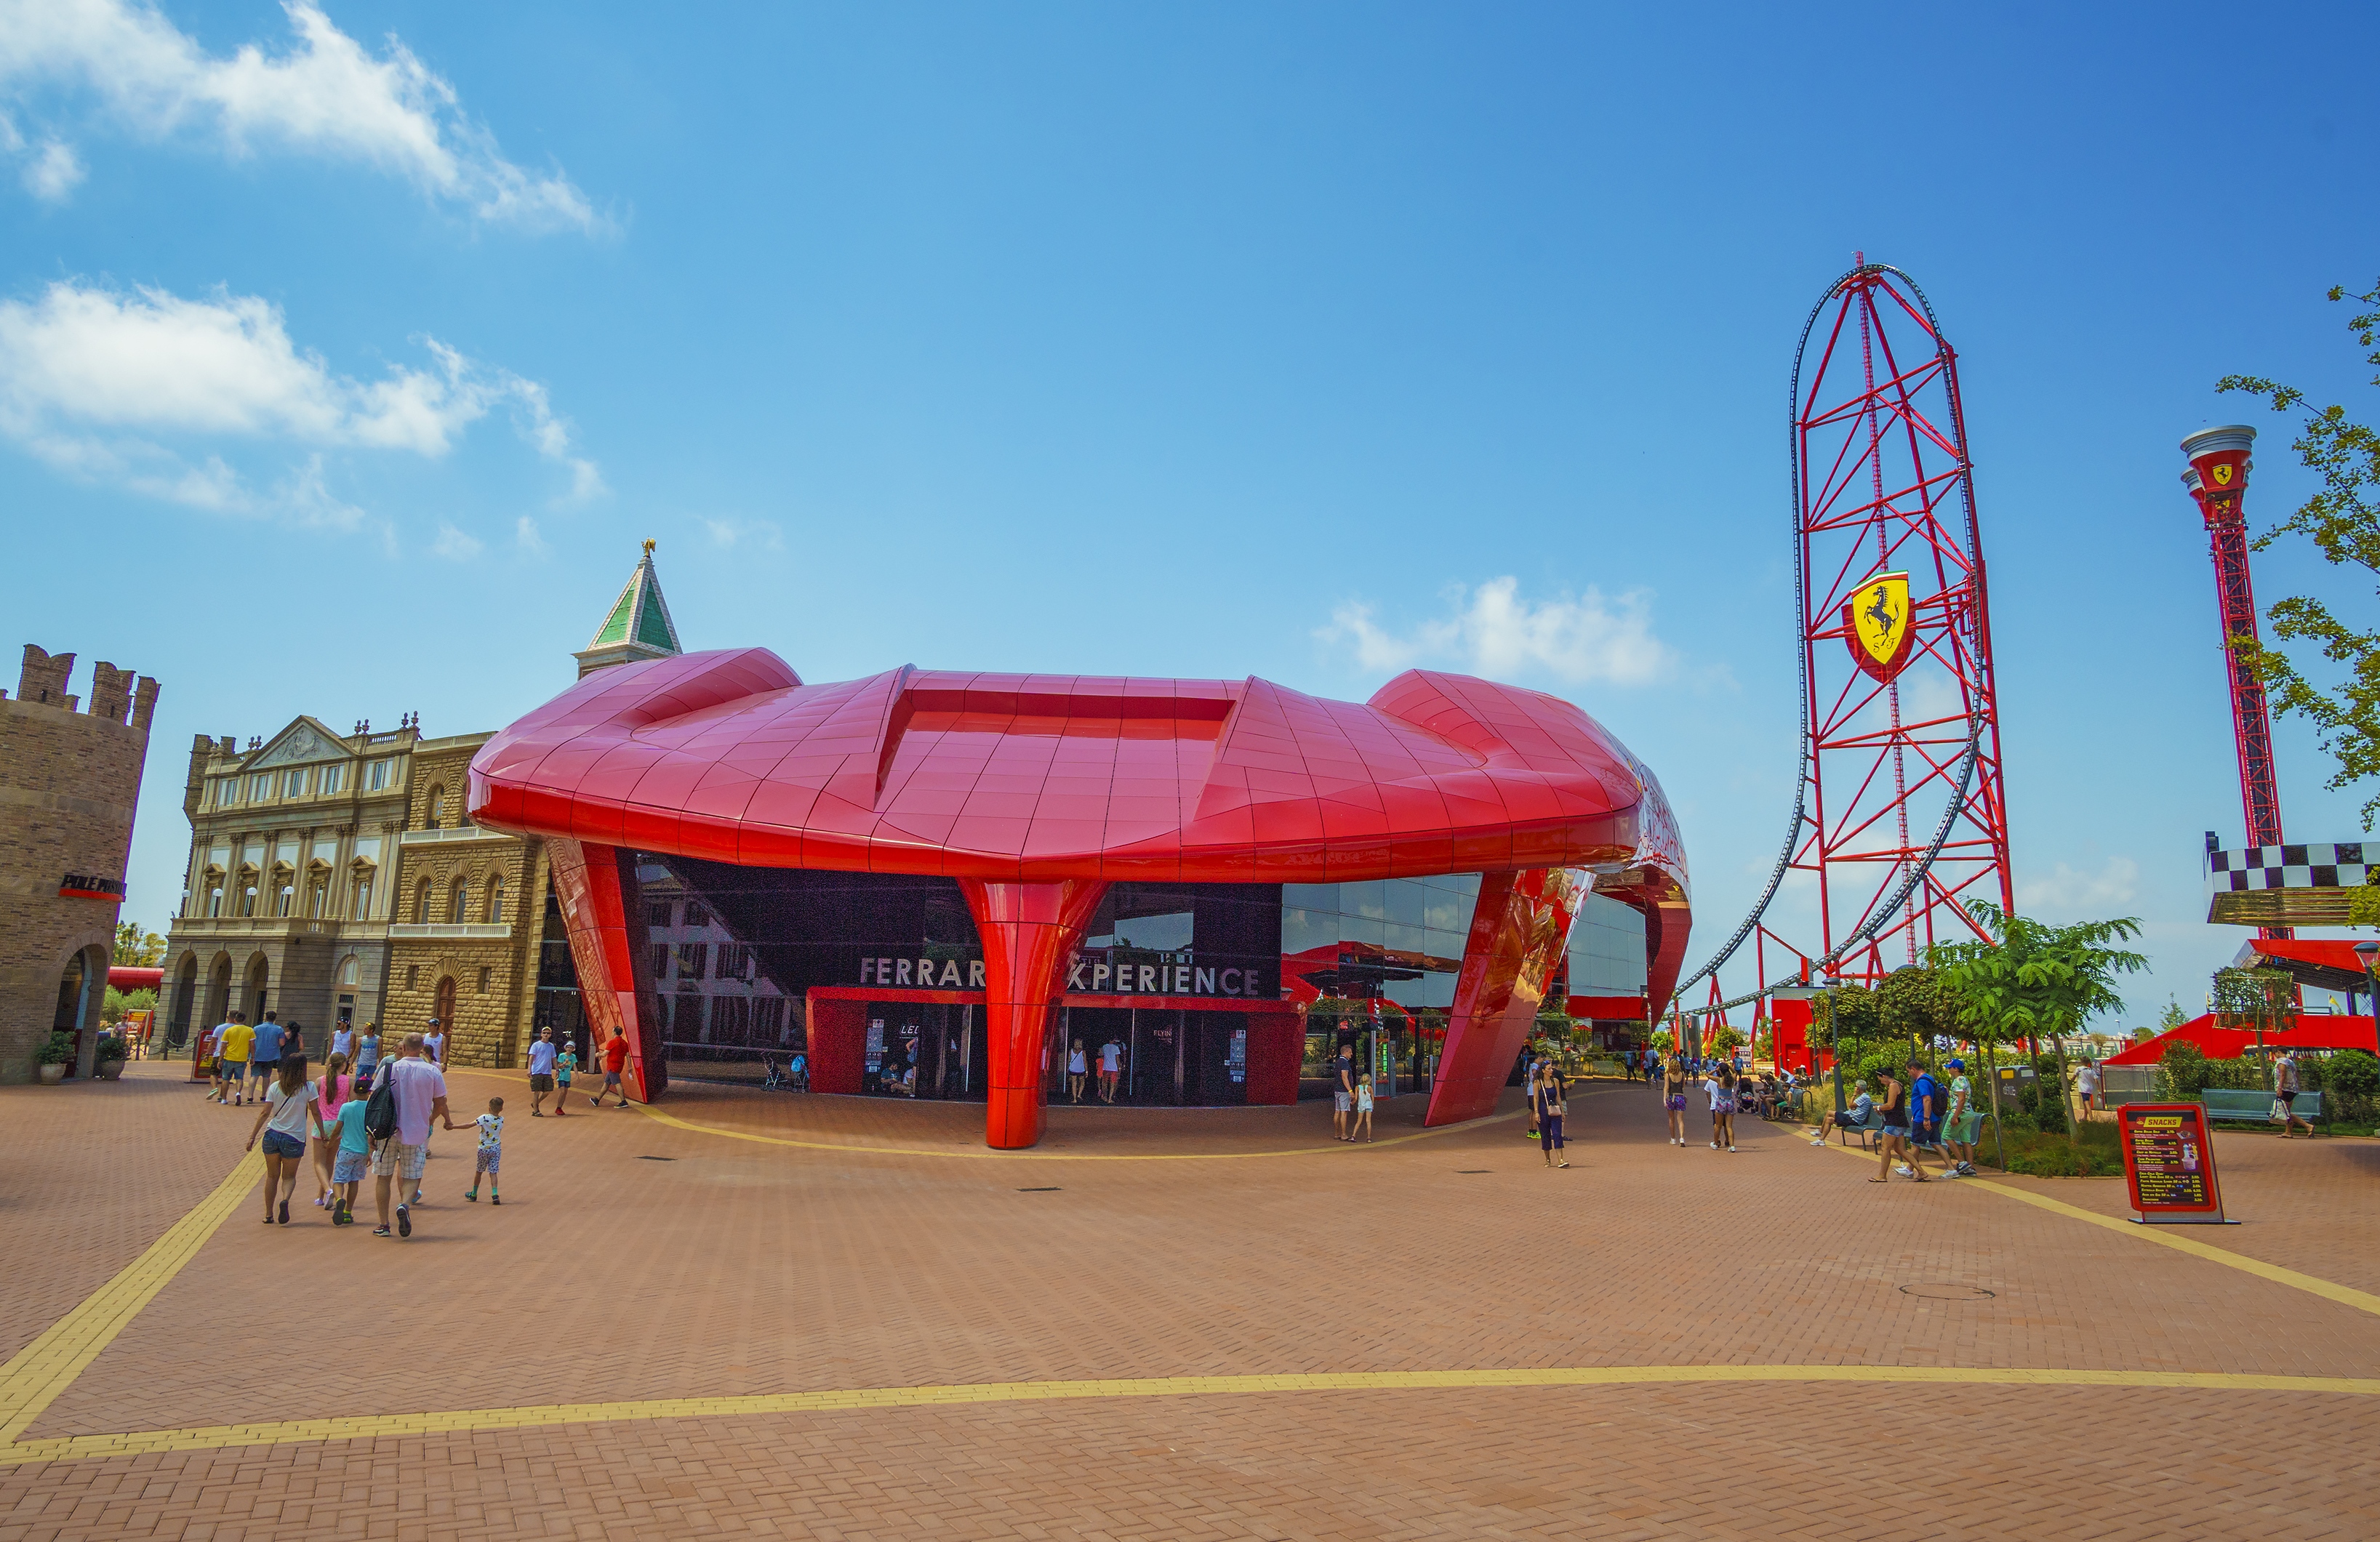 The FRP composite parts supplied covered approximately 1.500 m2 of the new Ferrari Land theme park in Spain.